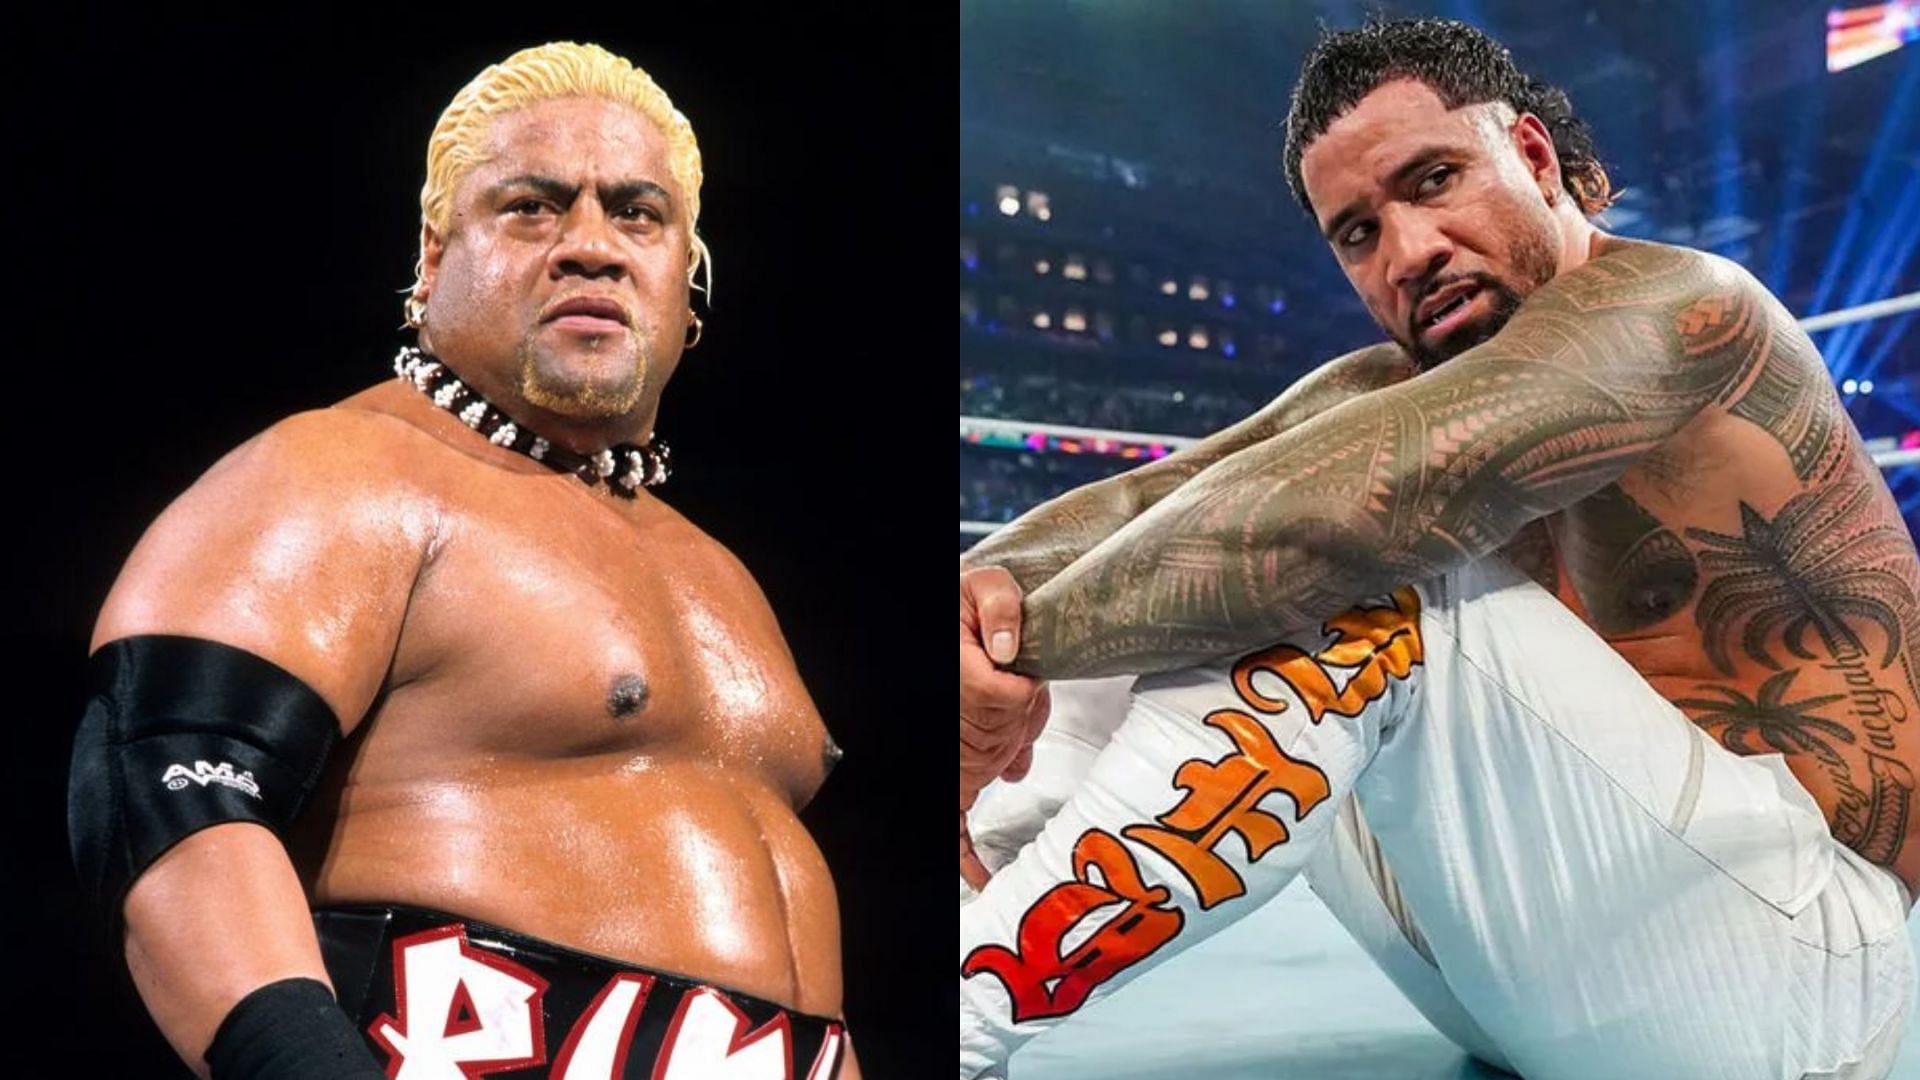 WWE Hall of Famer Rikishi (left) and Jey Uso (right)